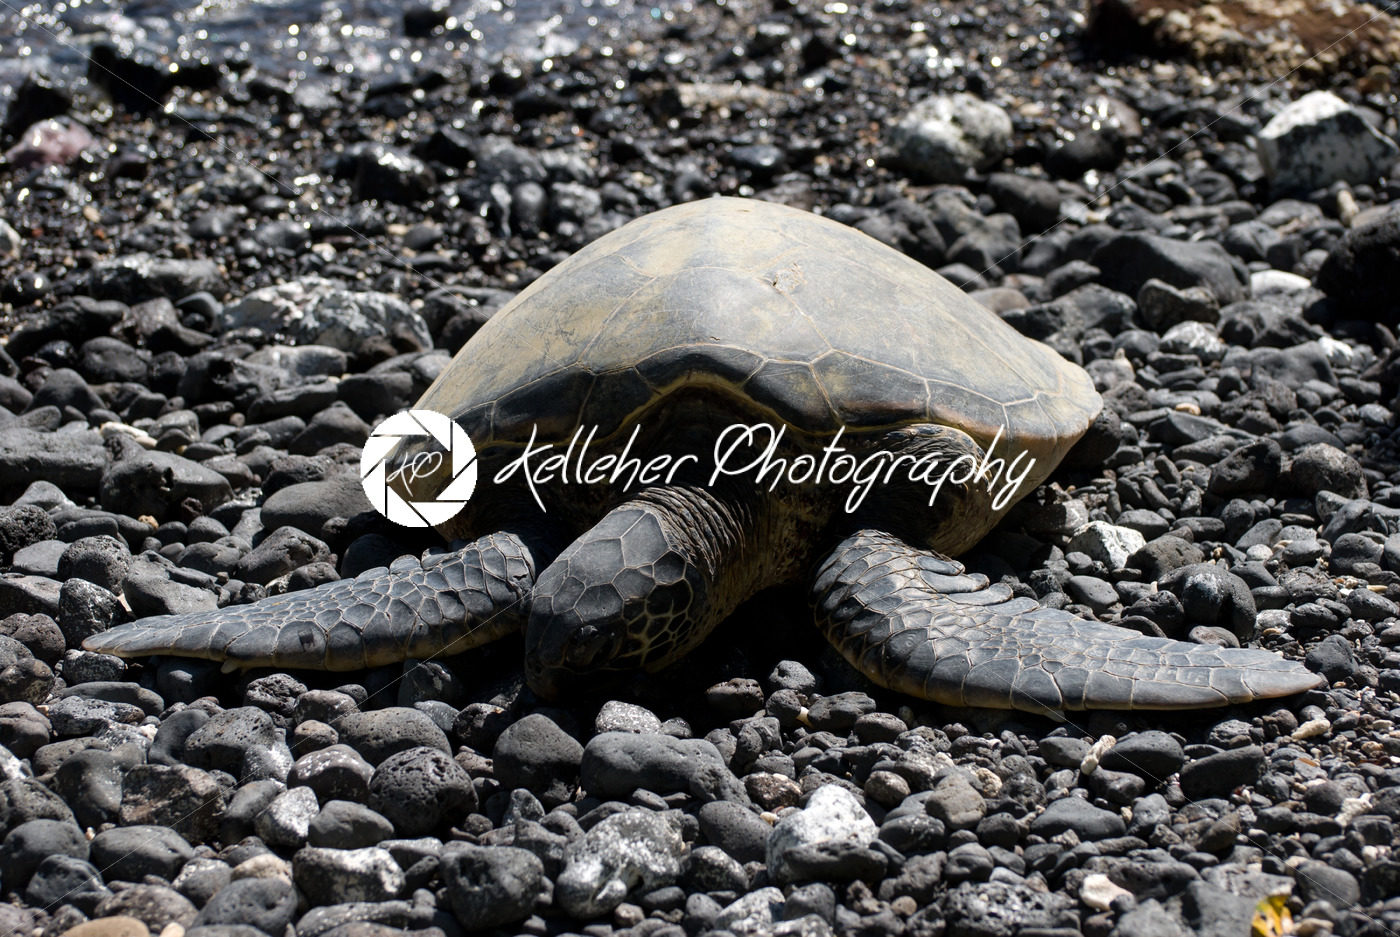 Close up of sea turtles resting on a rocky sand beach in Maui Hawaii - Kelleher Photography Store